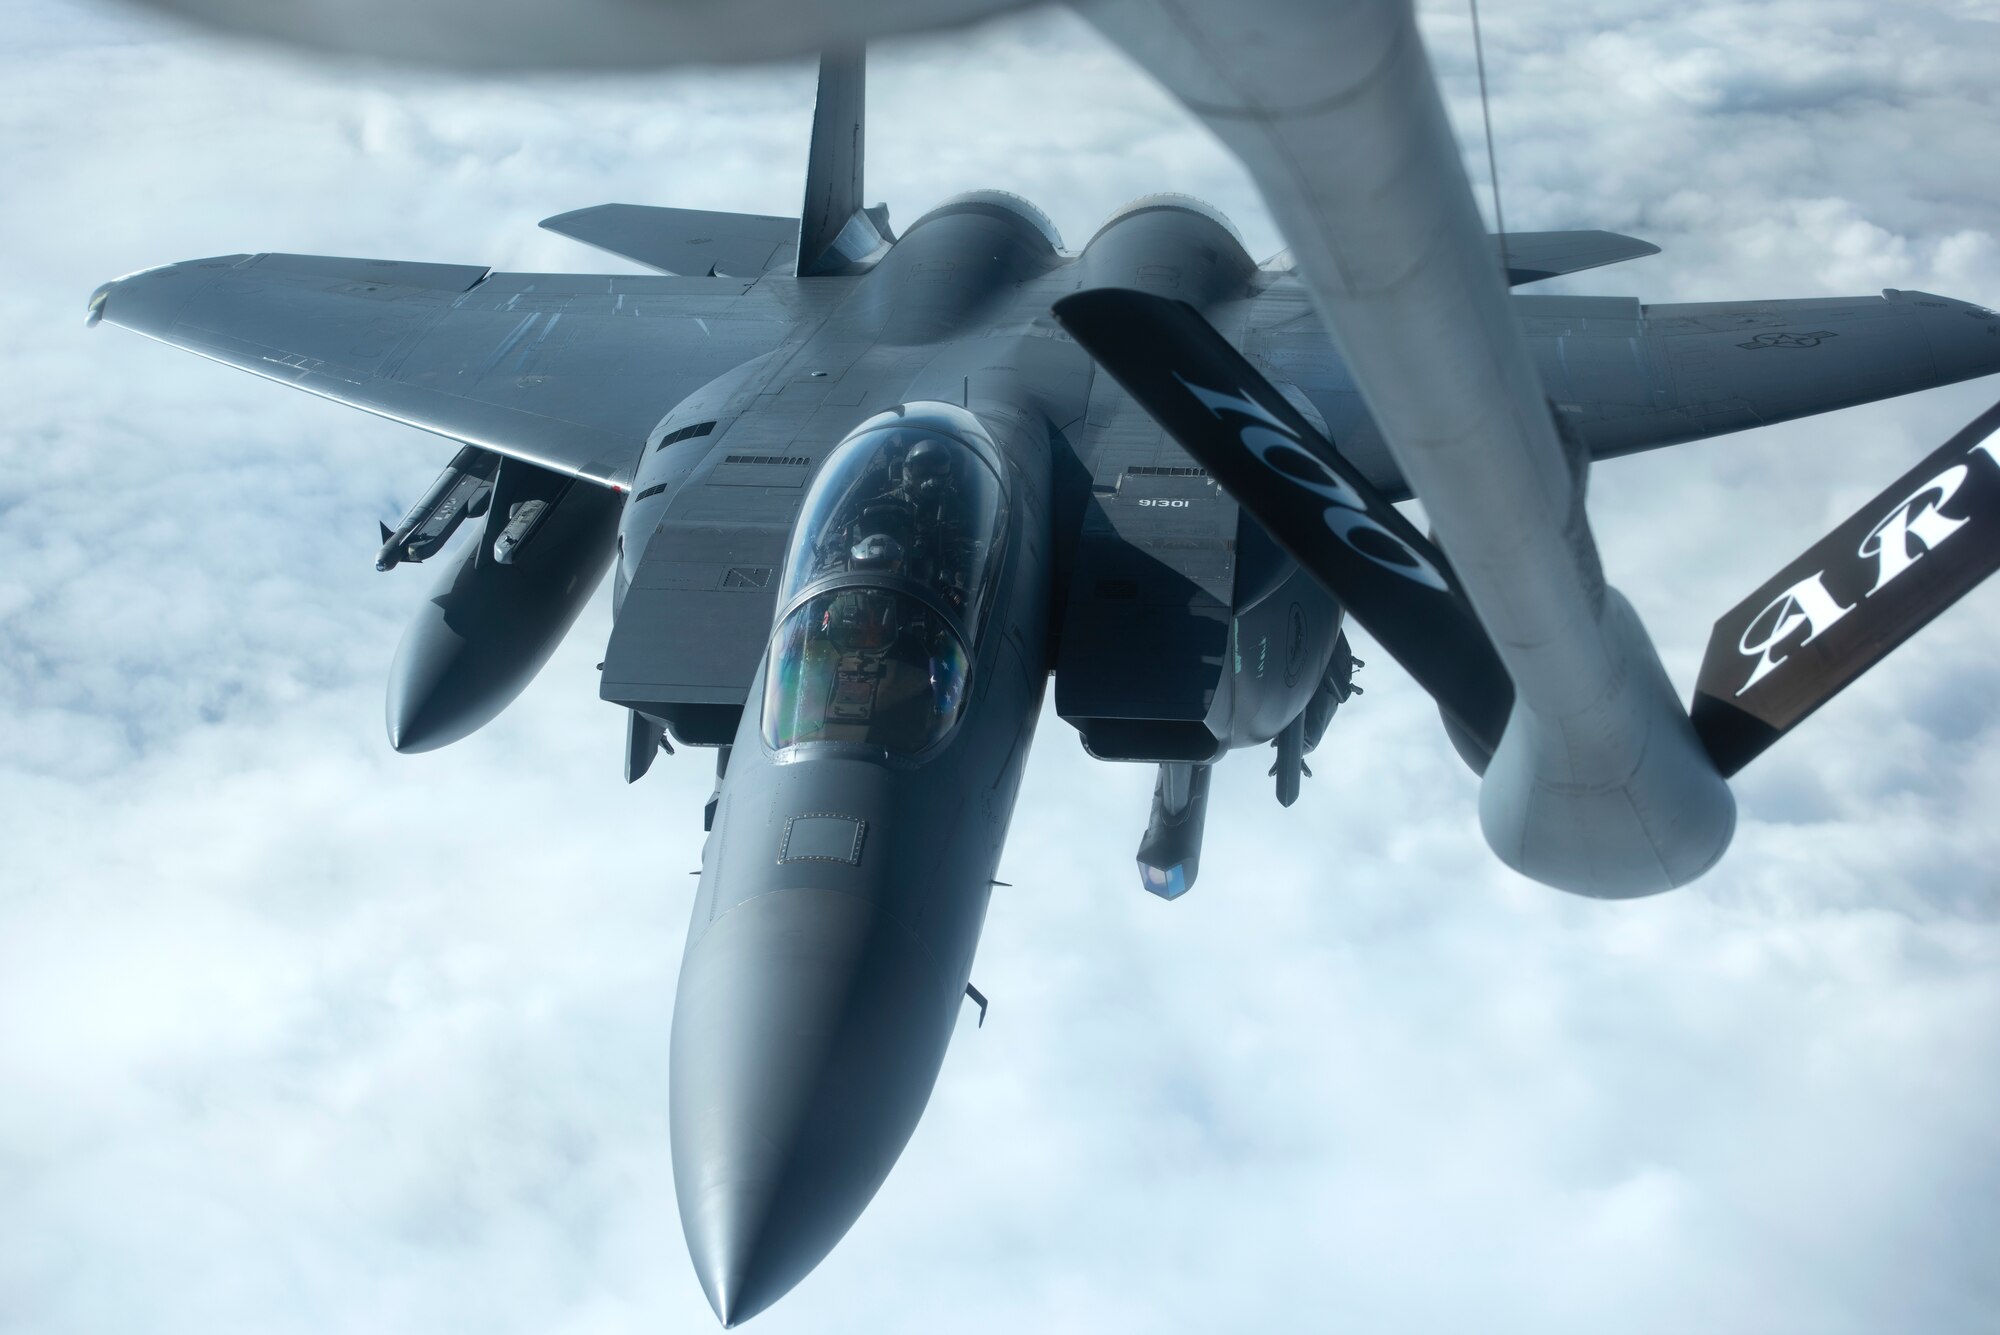 A 48th Fighter Wing F-15E Strike Eagle prepares to connect with a KC-135 Stratotanker for aerial refueling on the way to Amari Air Base, Estonia, in support of exercise Baltic Trident, March 15, 2021. Exercises like this strengthen interoperability with NATO allies and partner nations, and increase 48th FW sortie generation and sustainment capabilities away from home station through the application of Agile Combat Employment concepts. (U.S. Air Force photo by Airman 1st Class Jessi Monte)